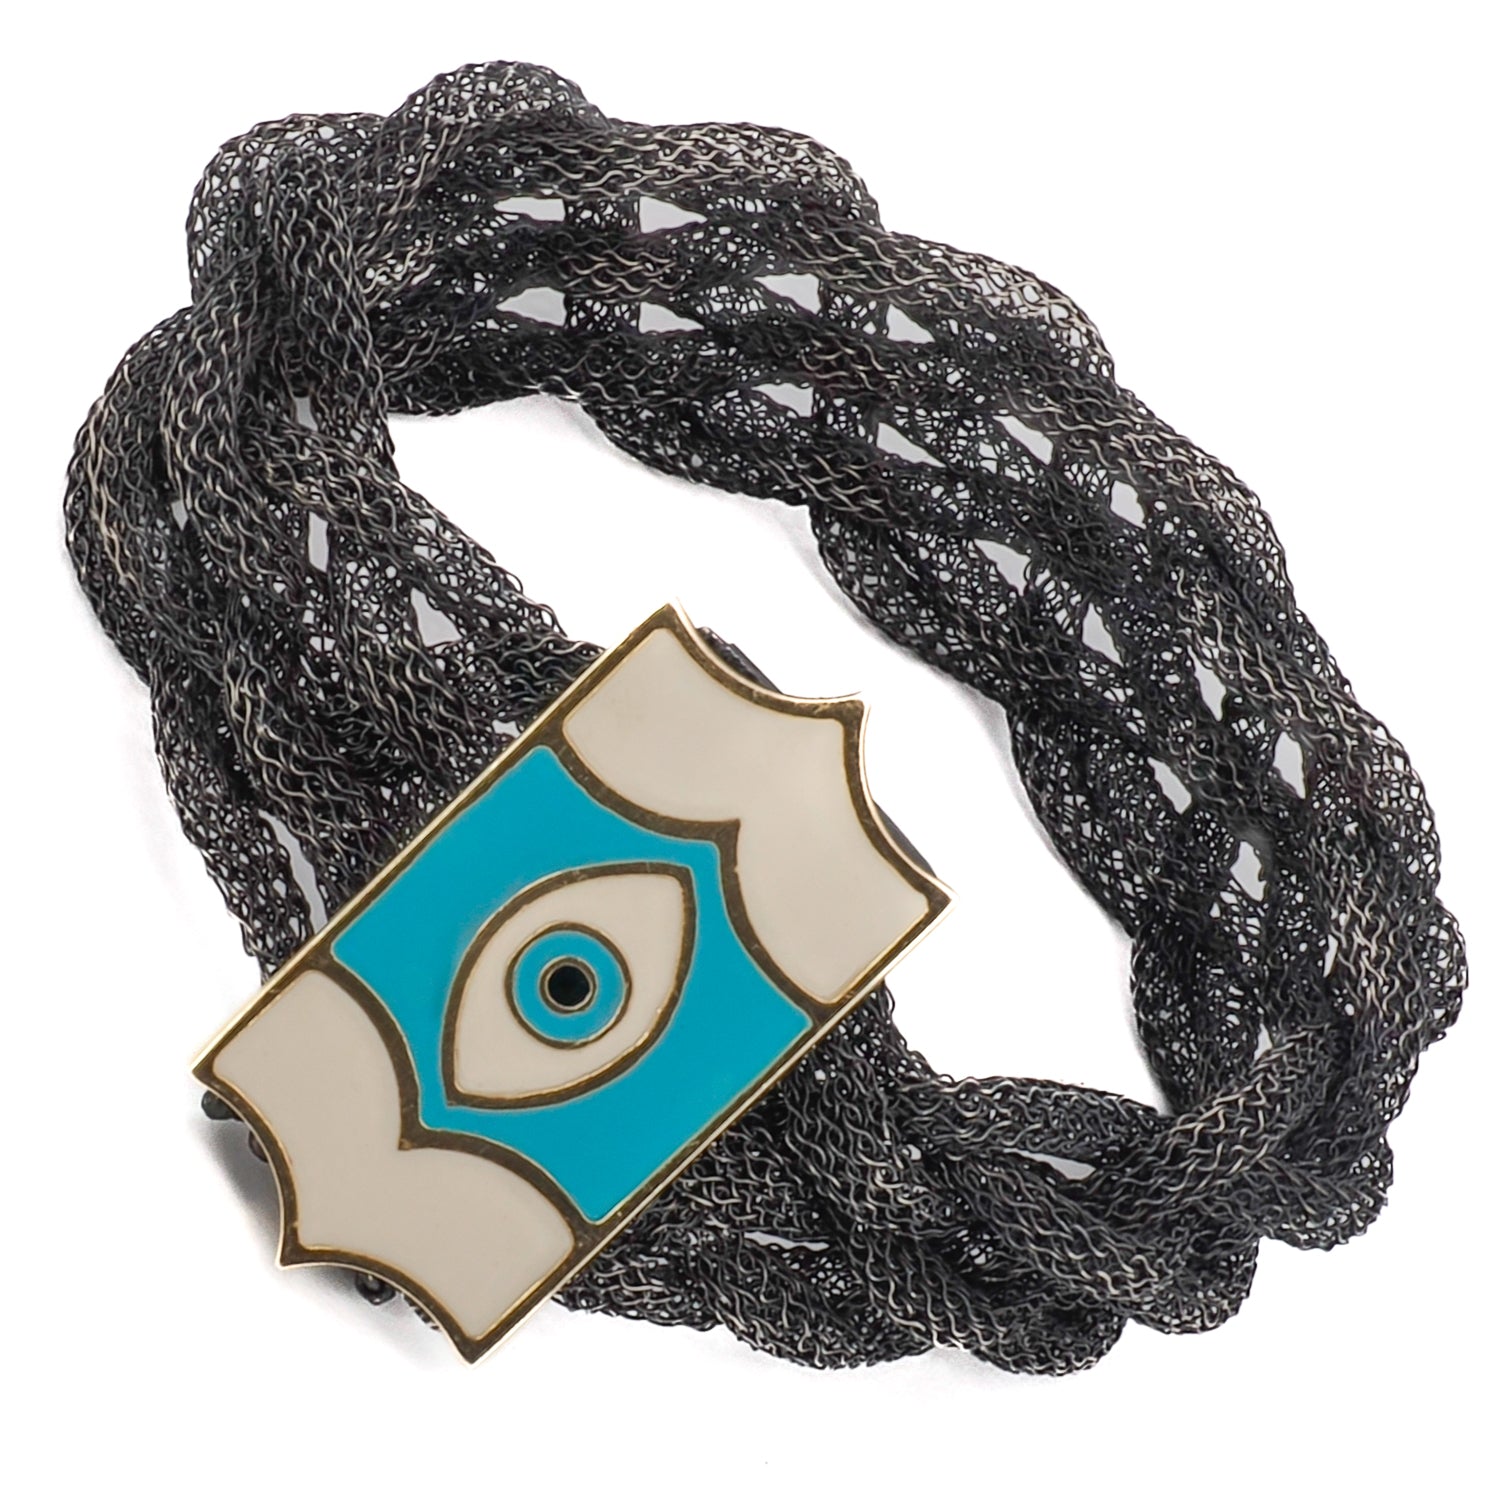 Experience the mystical allure of the Silver Braided Evil Eye Bracelet, a unique and protective accessory that combines style and symbolism.